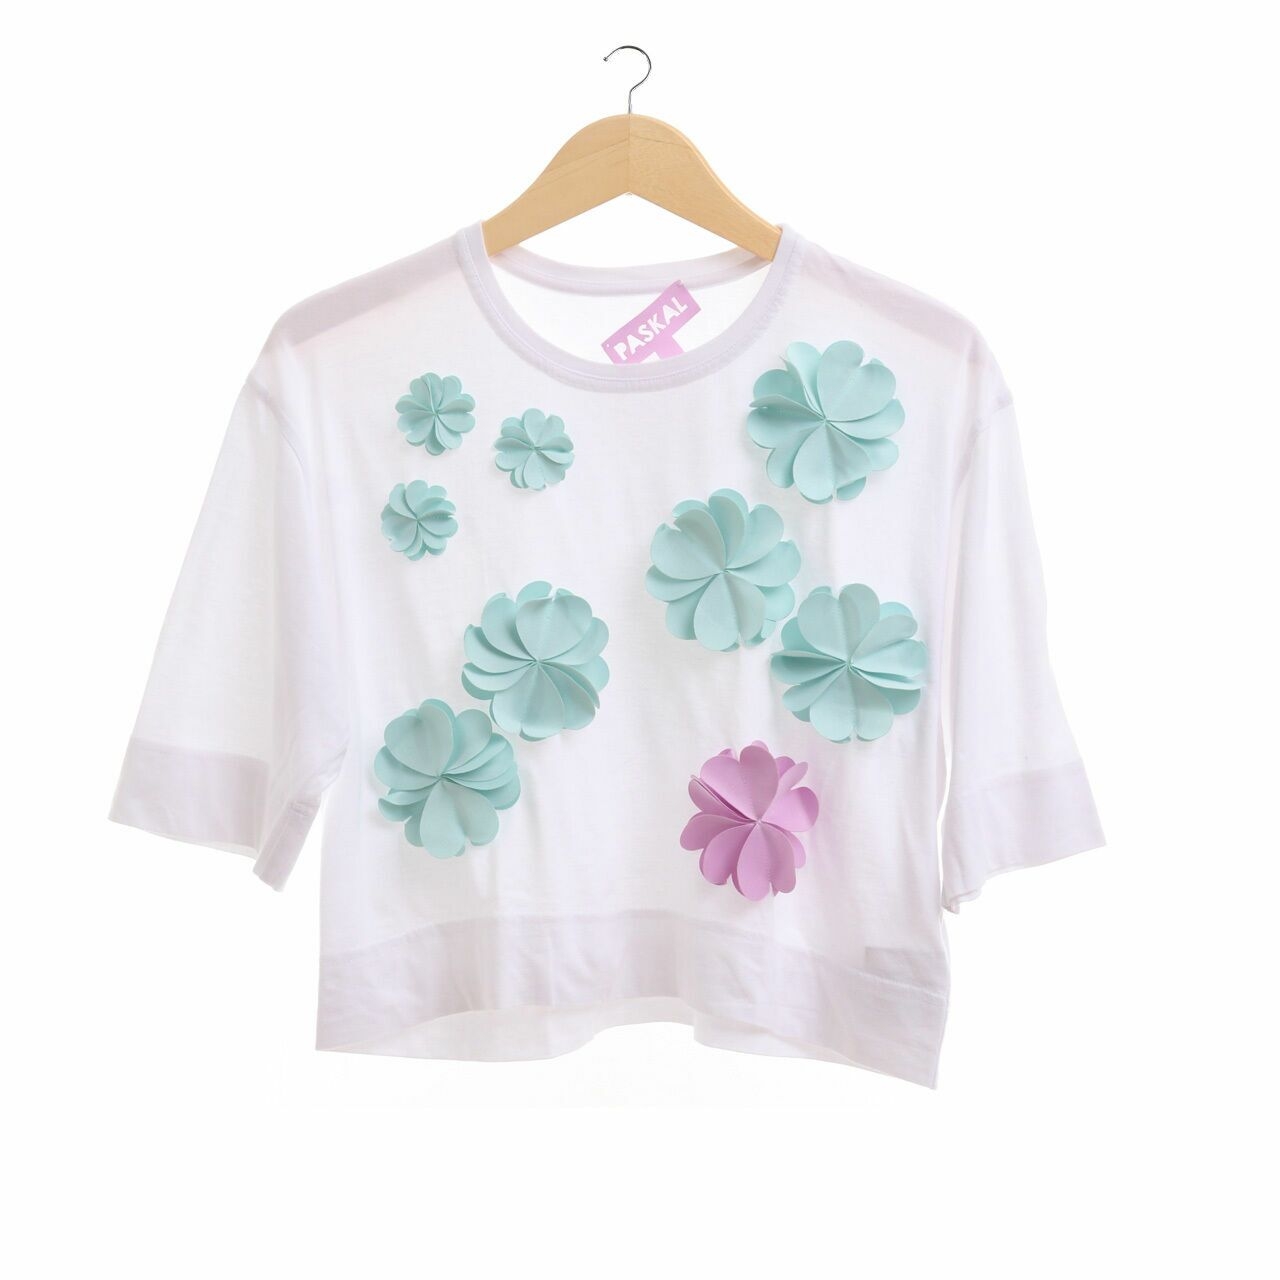 Paskal White Decorated With 3D Floral Appliques T-shirt